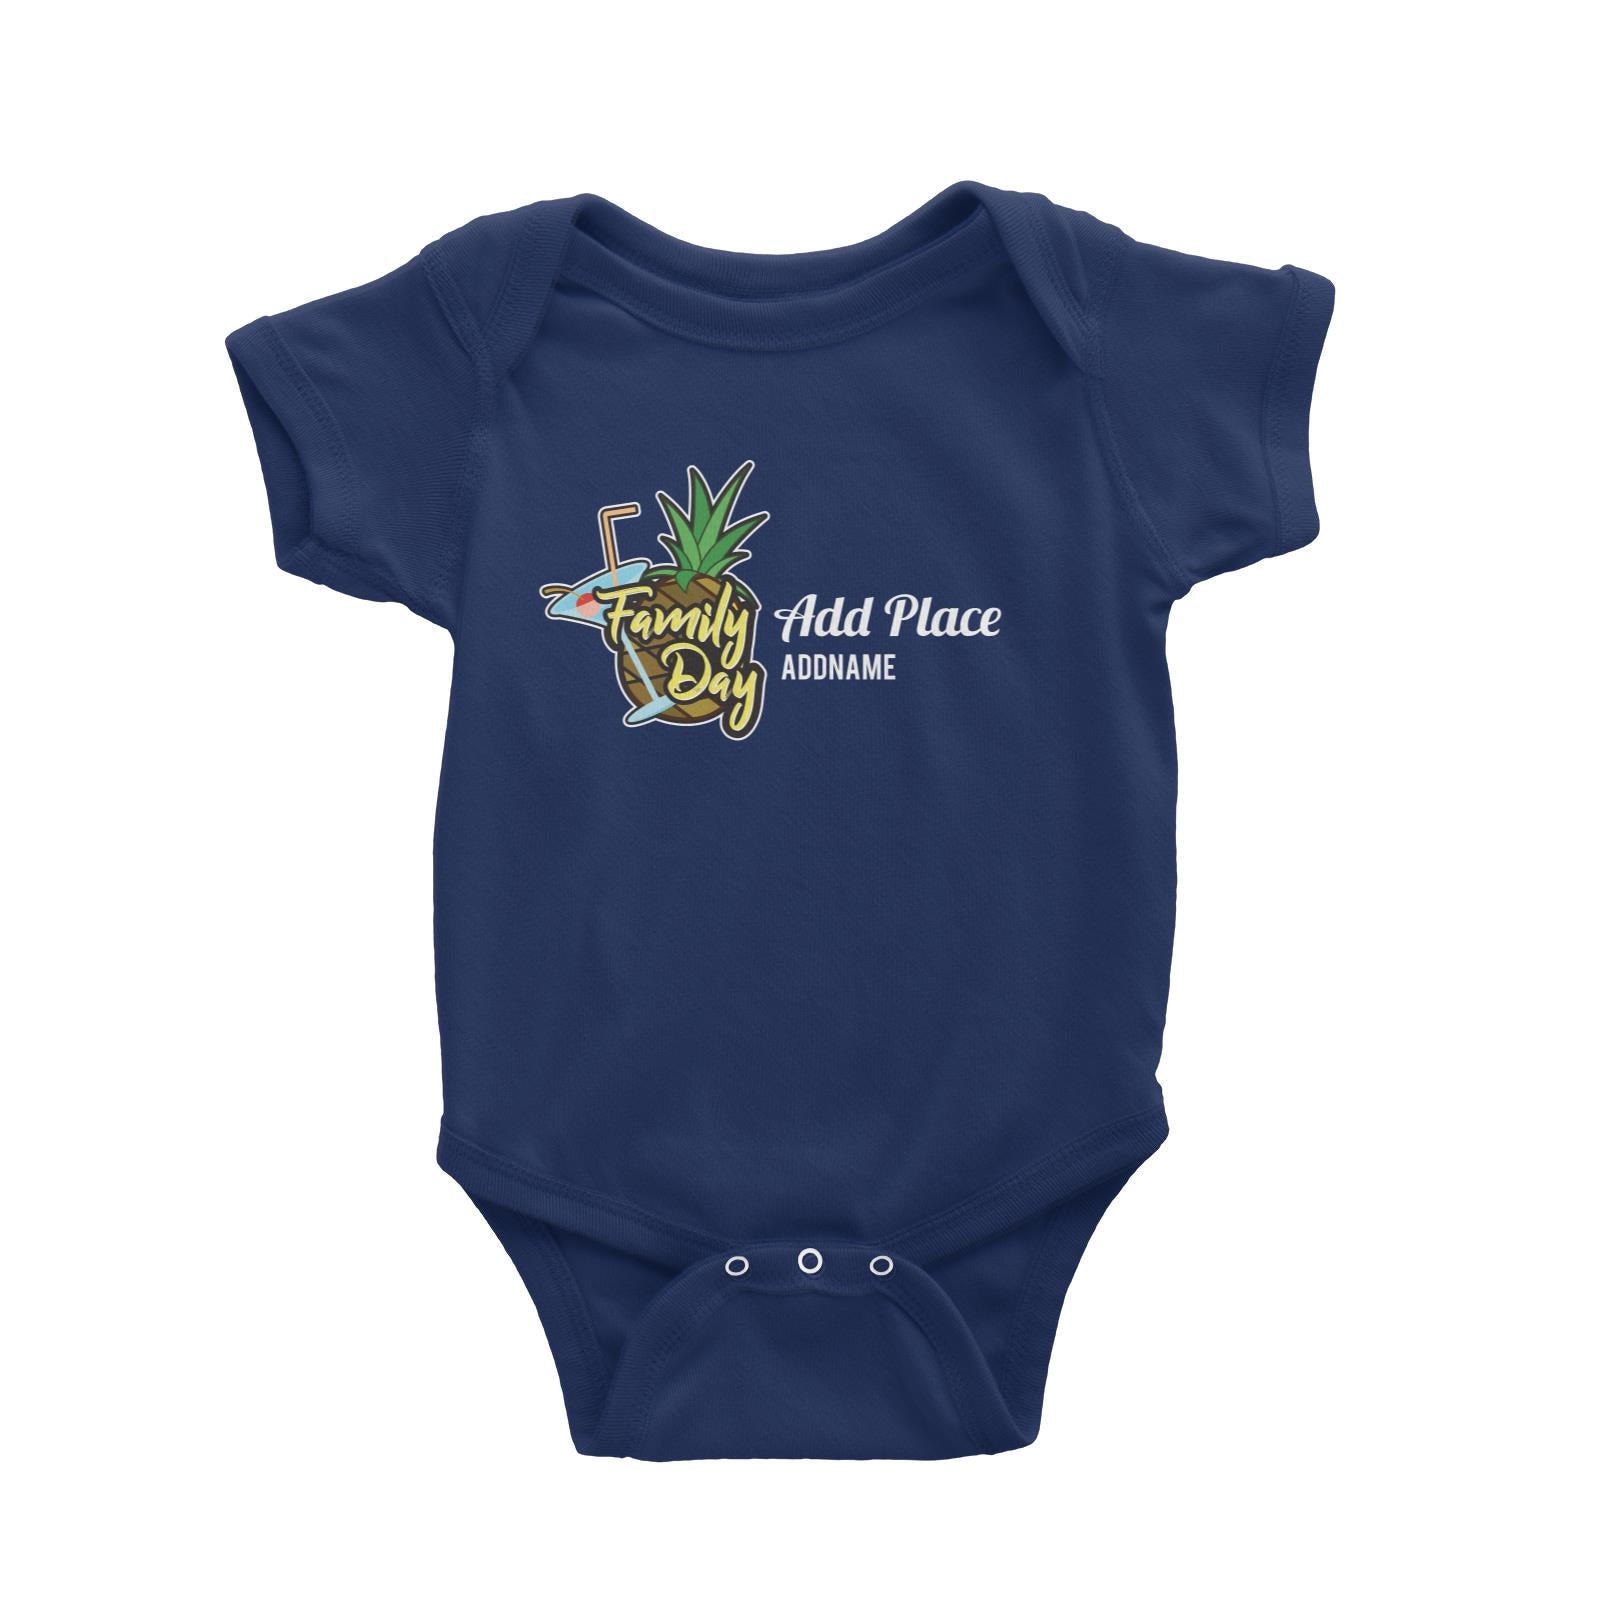 Family Day Tropical Pineapple Family Day Addname And Add Place Baby Romper